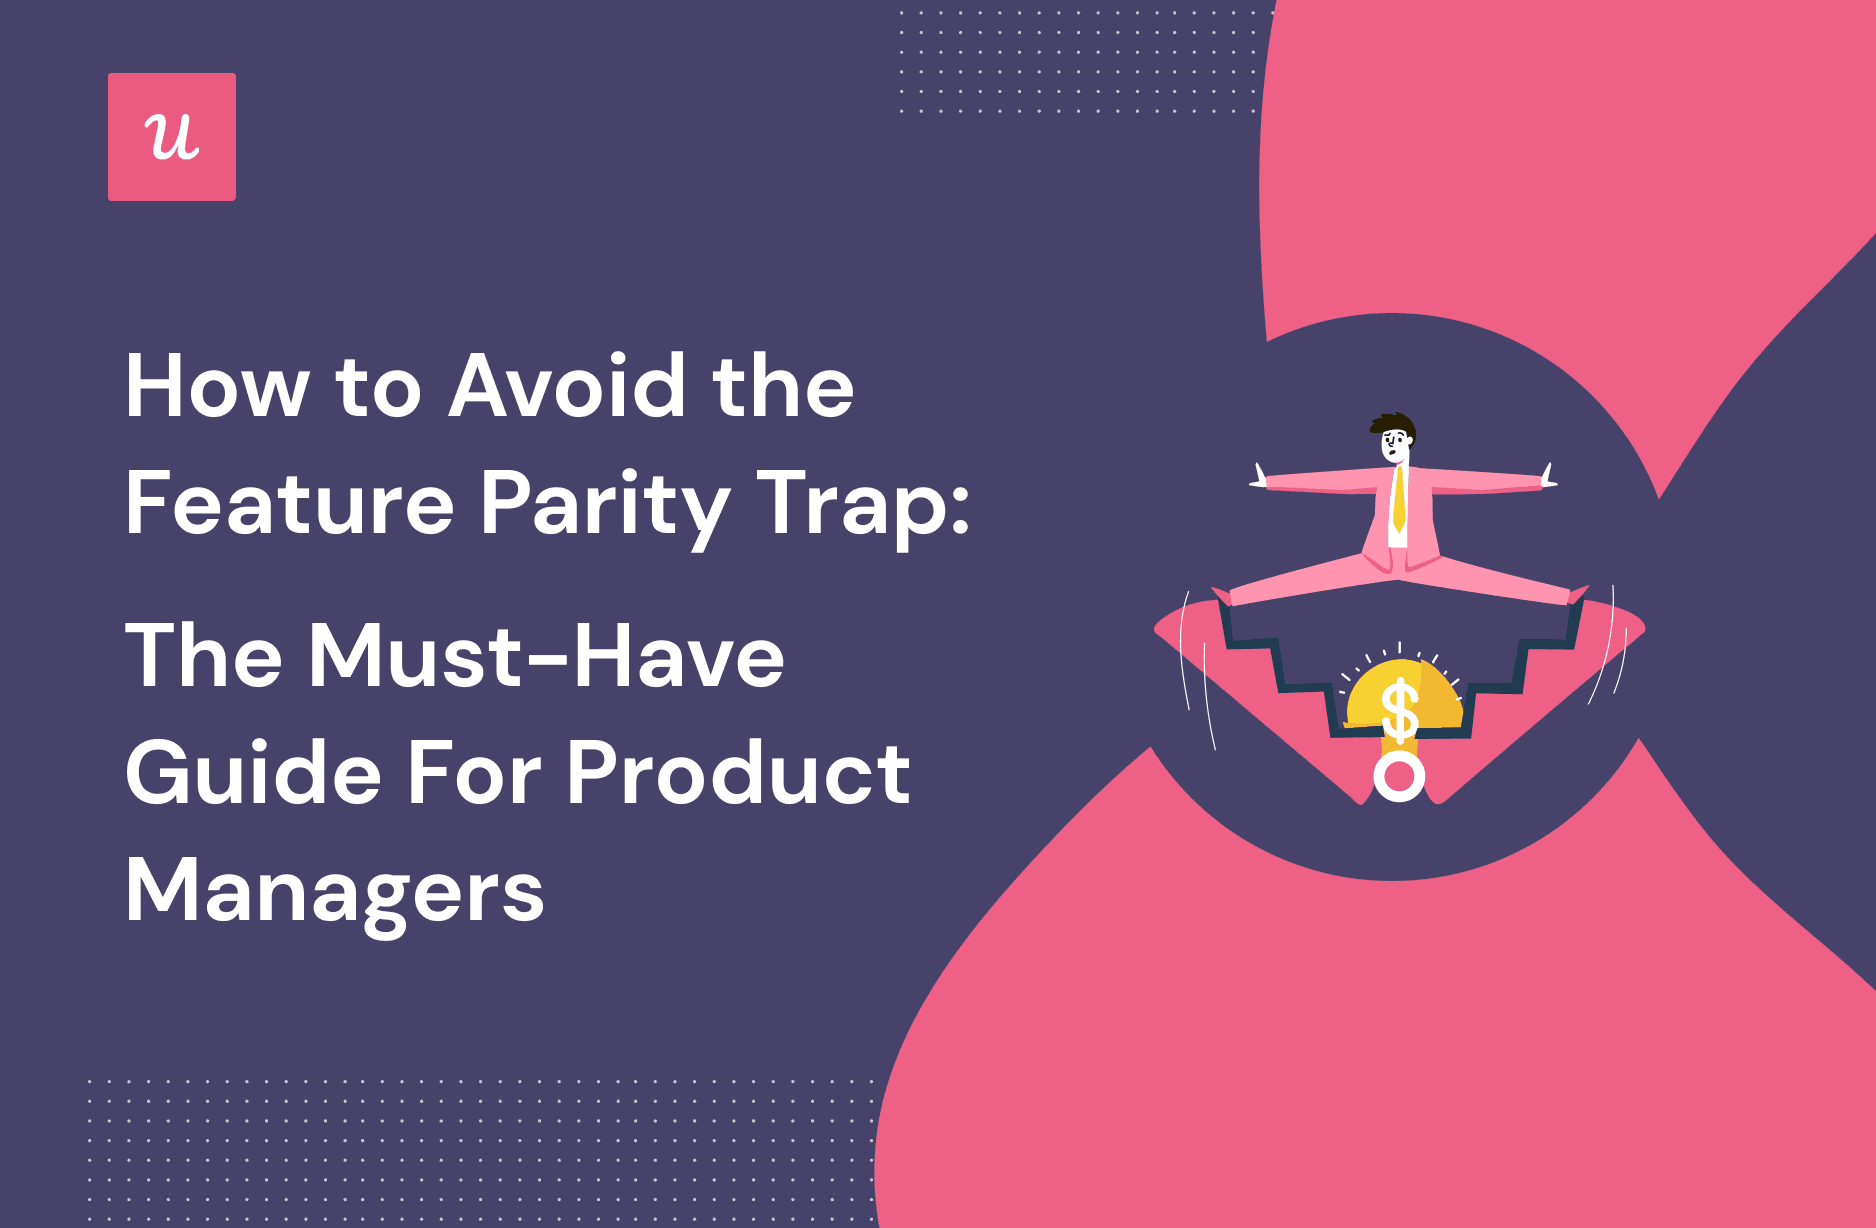 How to Avoid the Feature Parity Trap: The Must-Have Guide For Product Managers